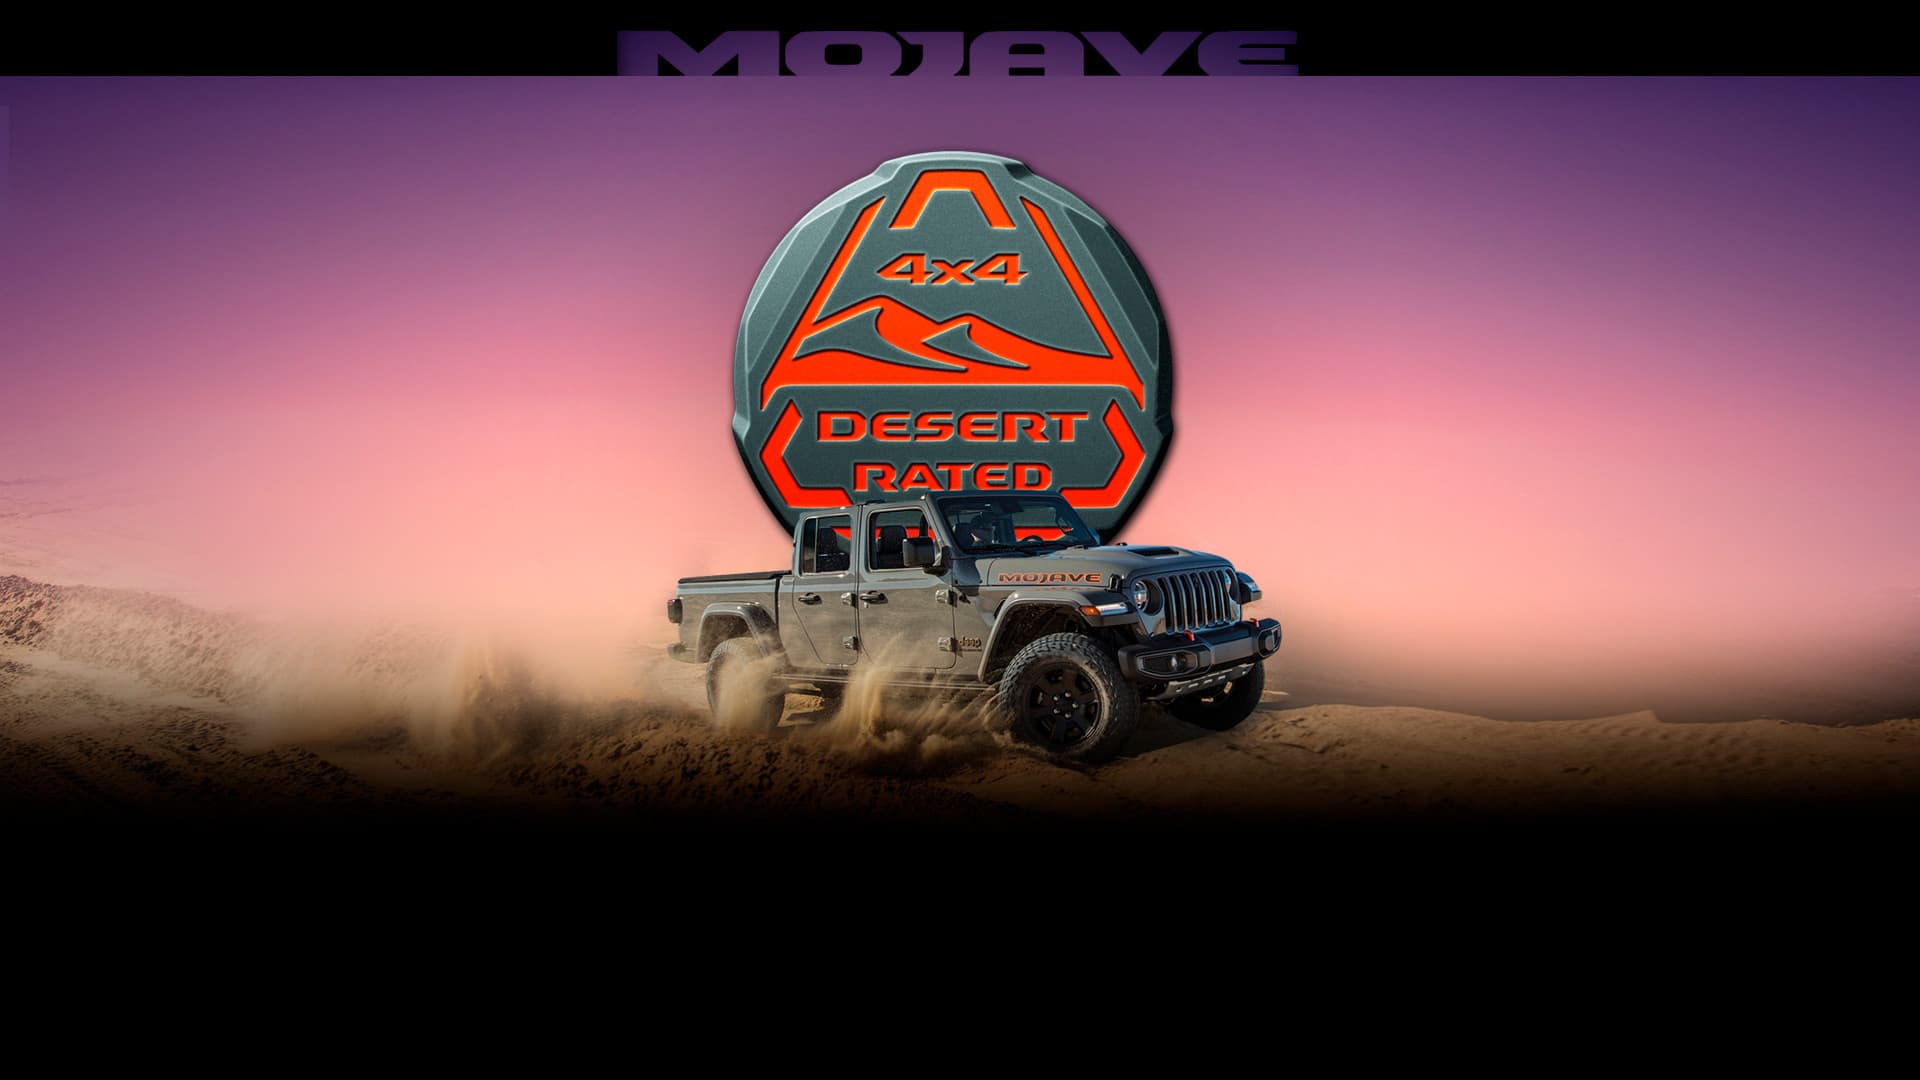 Mojave. A 2023 Jeep Gladiator Mojave being driven on sand in the desert, with the 4x4 Desert Rated logo superimposed overhead.